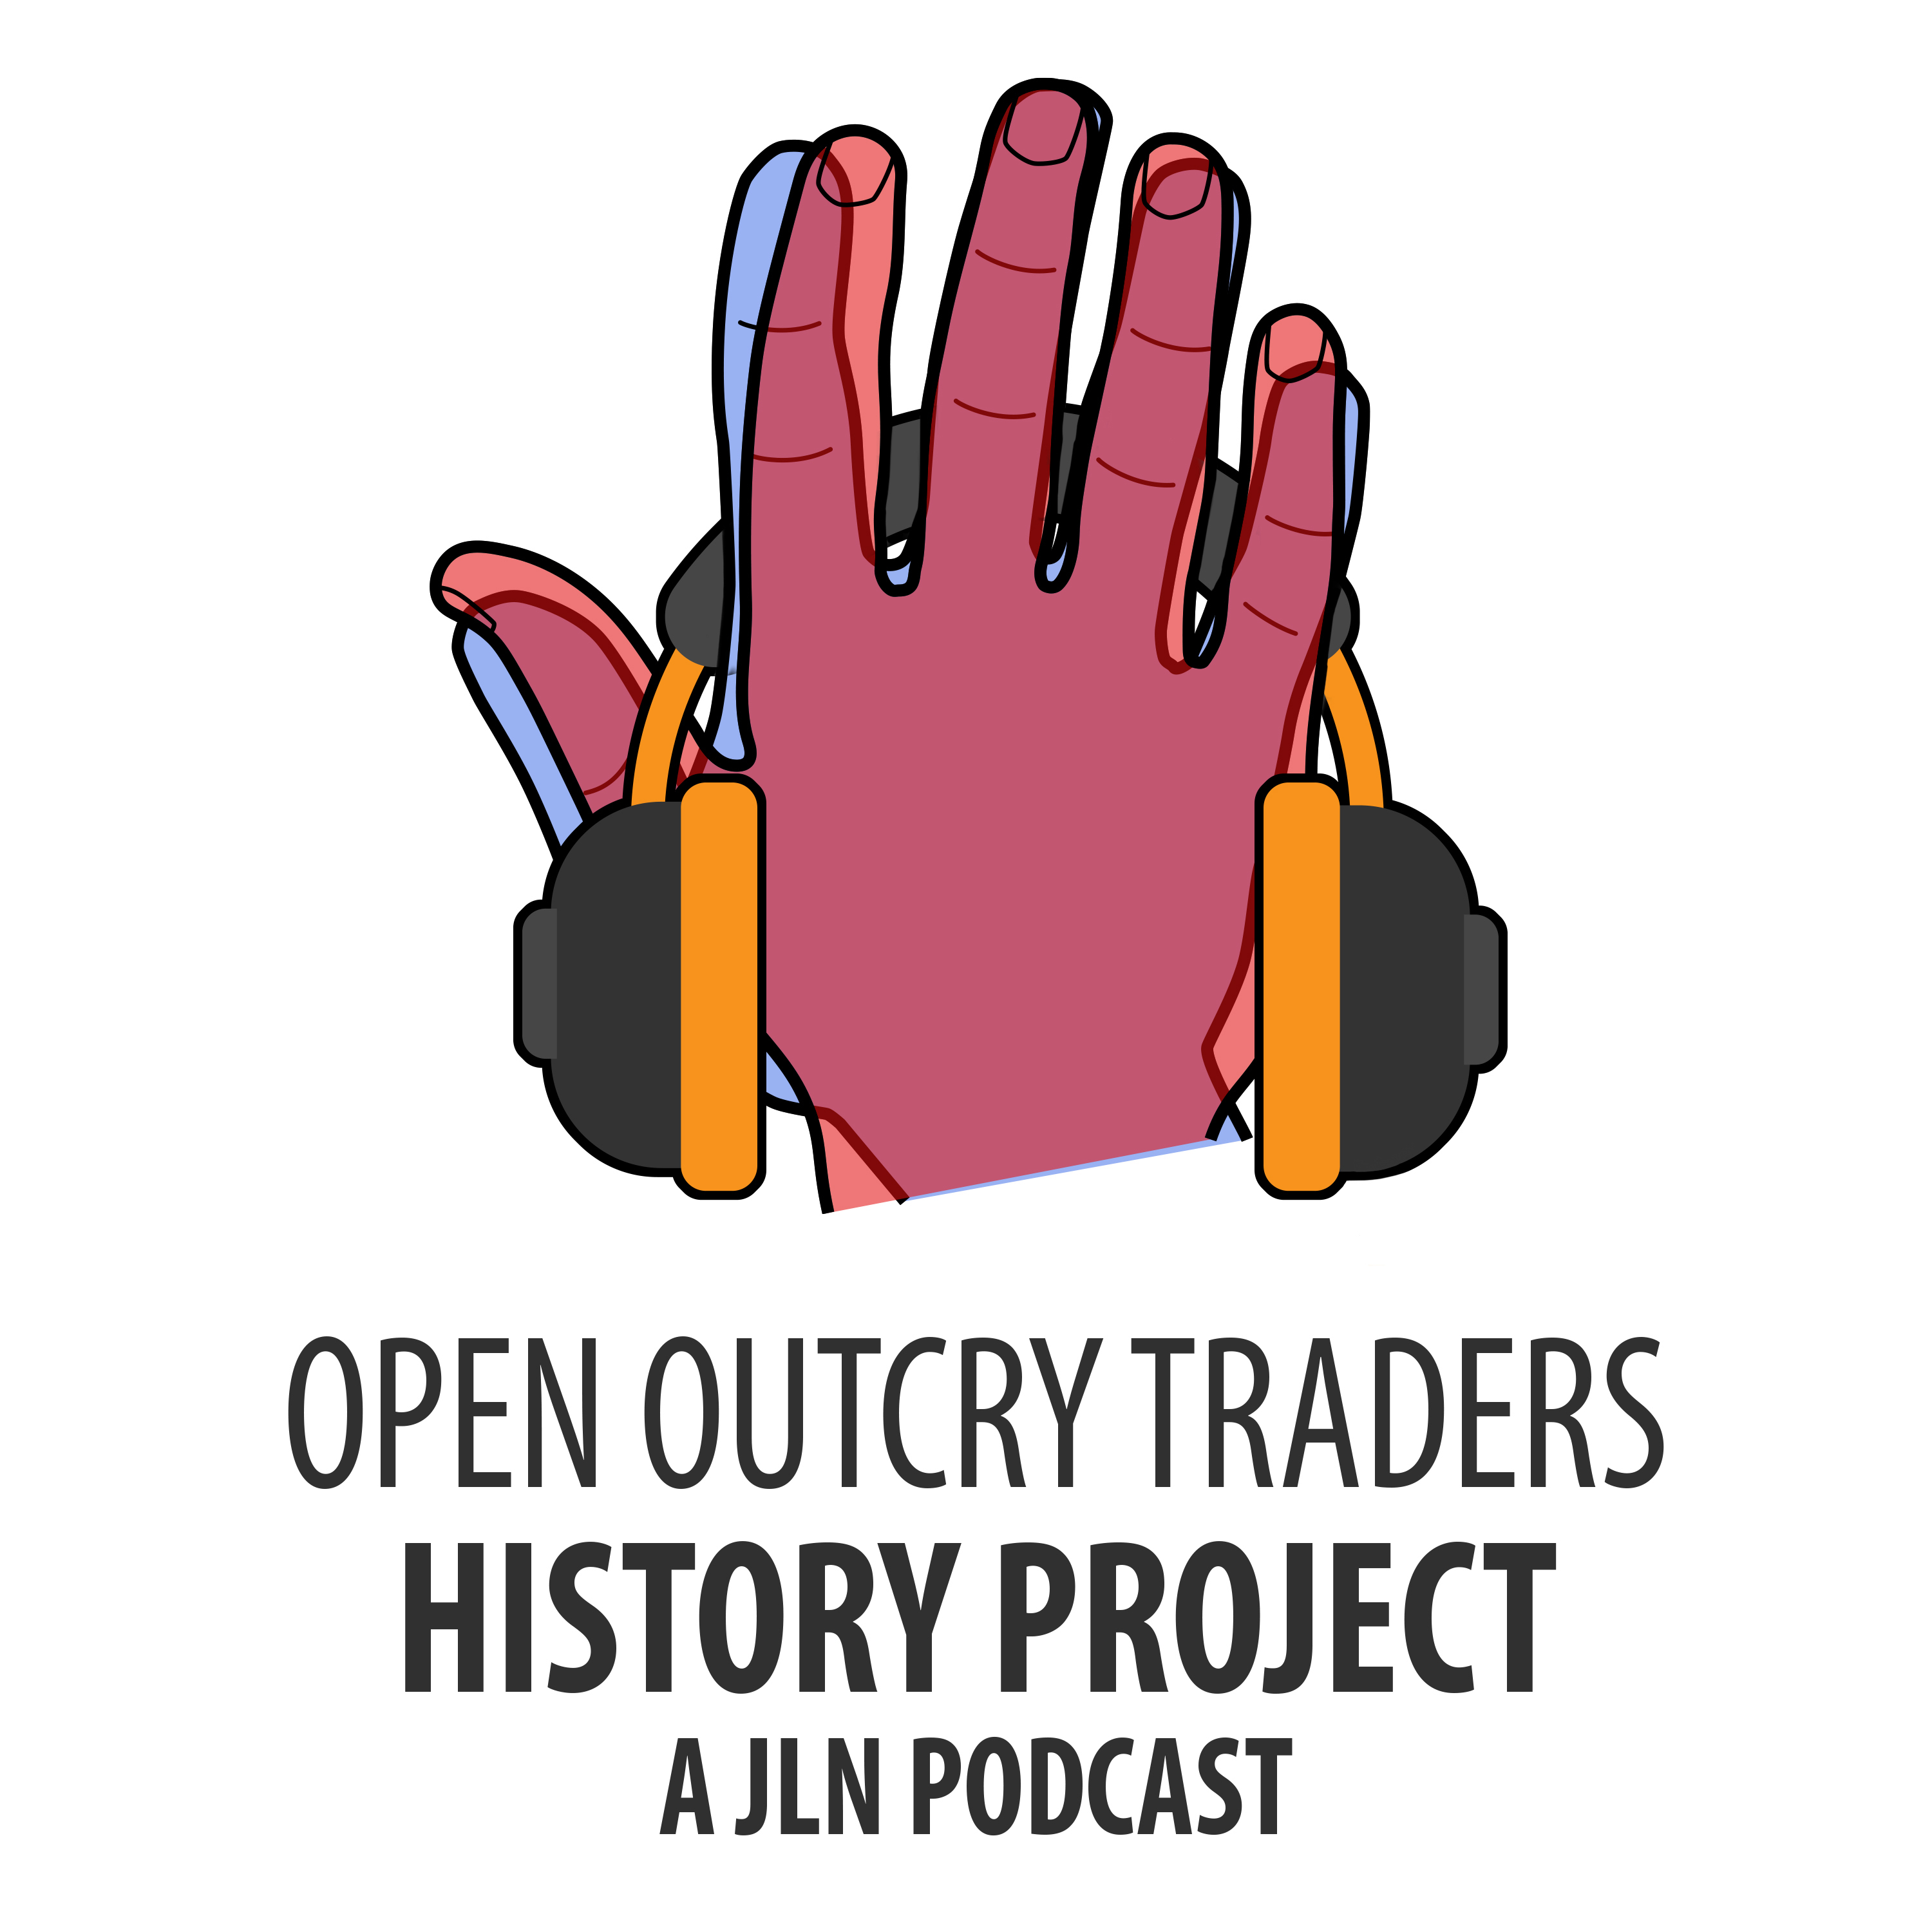 Jordan Melamed - Open Outcry Traders History Project Podcast